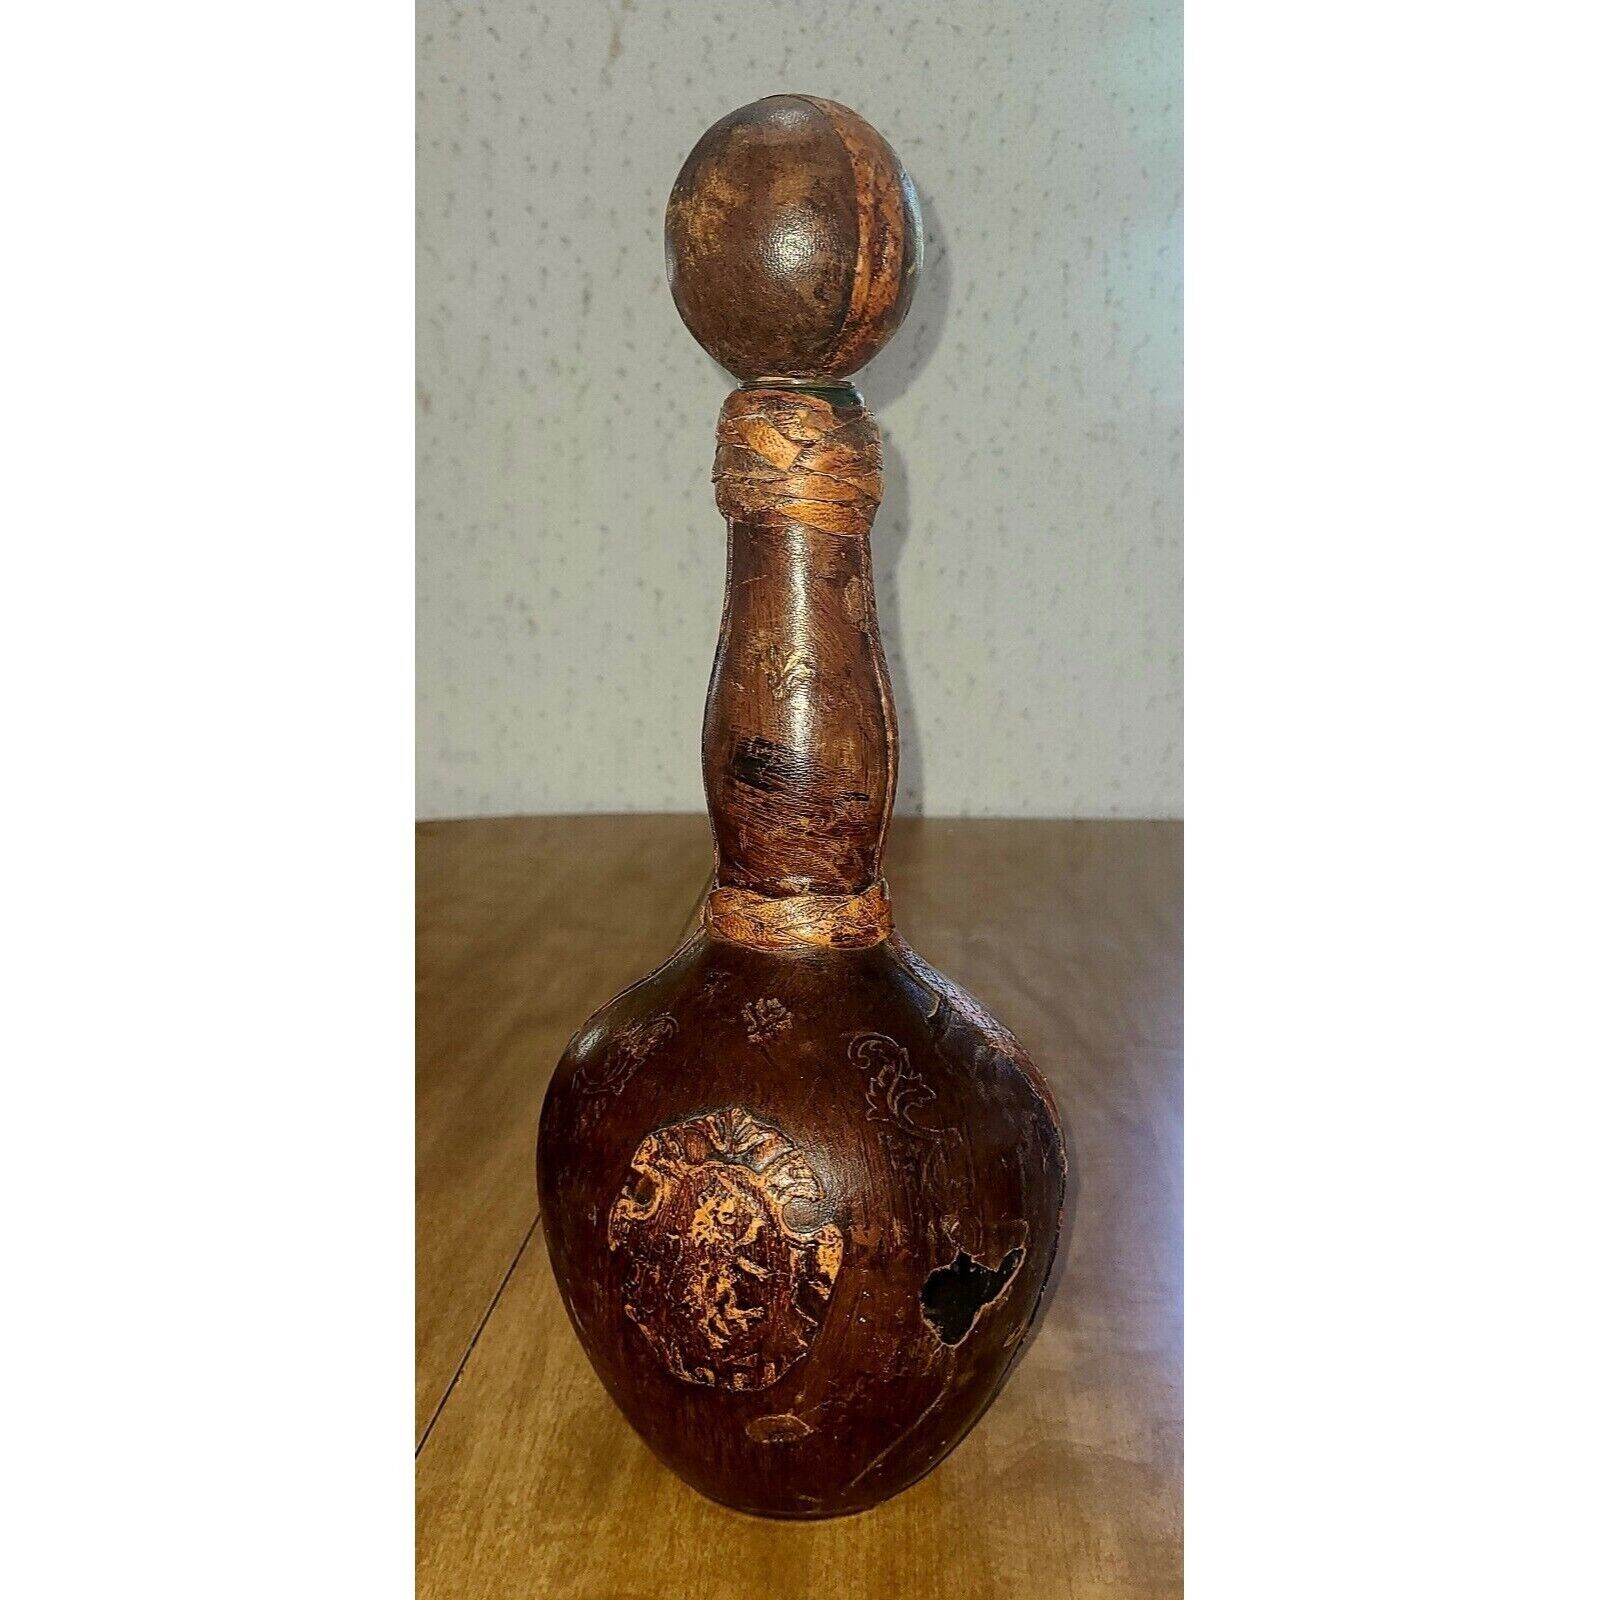 Vintage Italian Leather Wrapped Brown Decanter Bottle with Ball Stopper 12